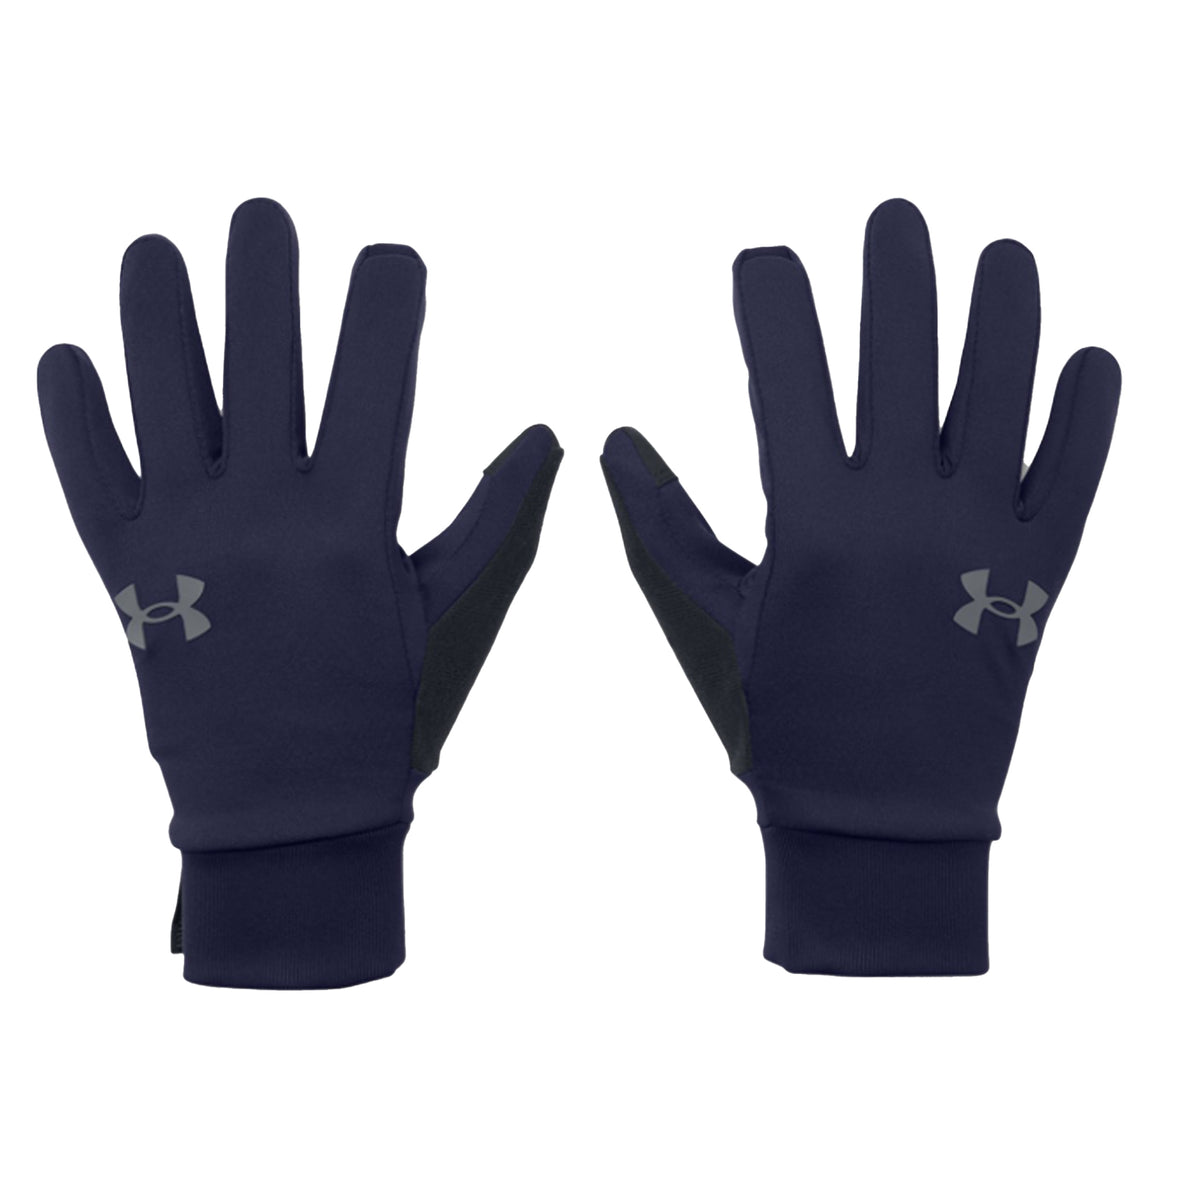 Under Armour Liner Storm Gloves: Navy